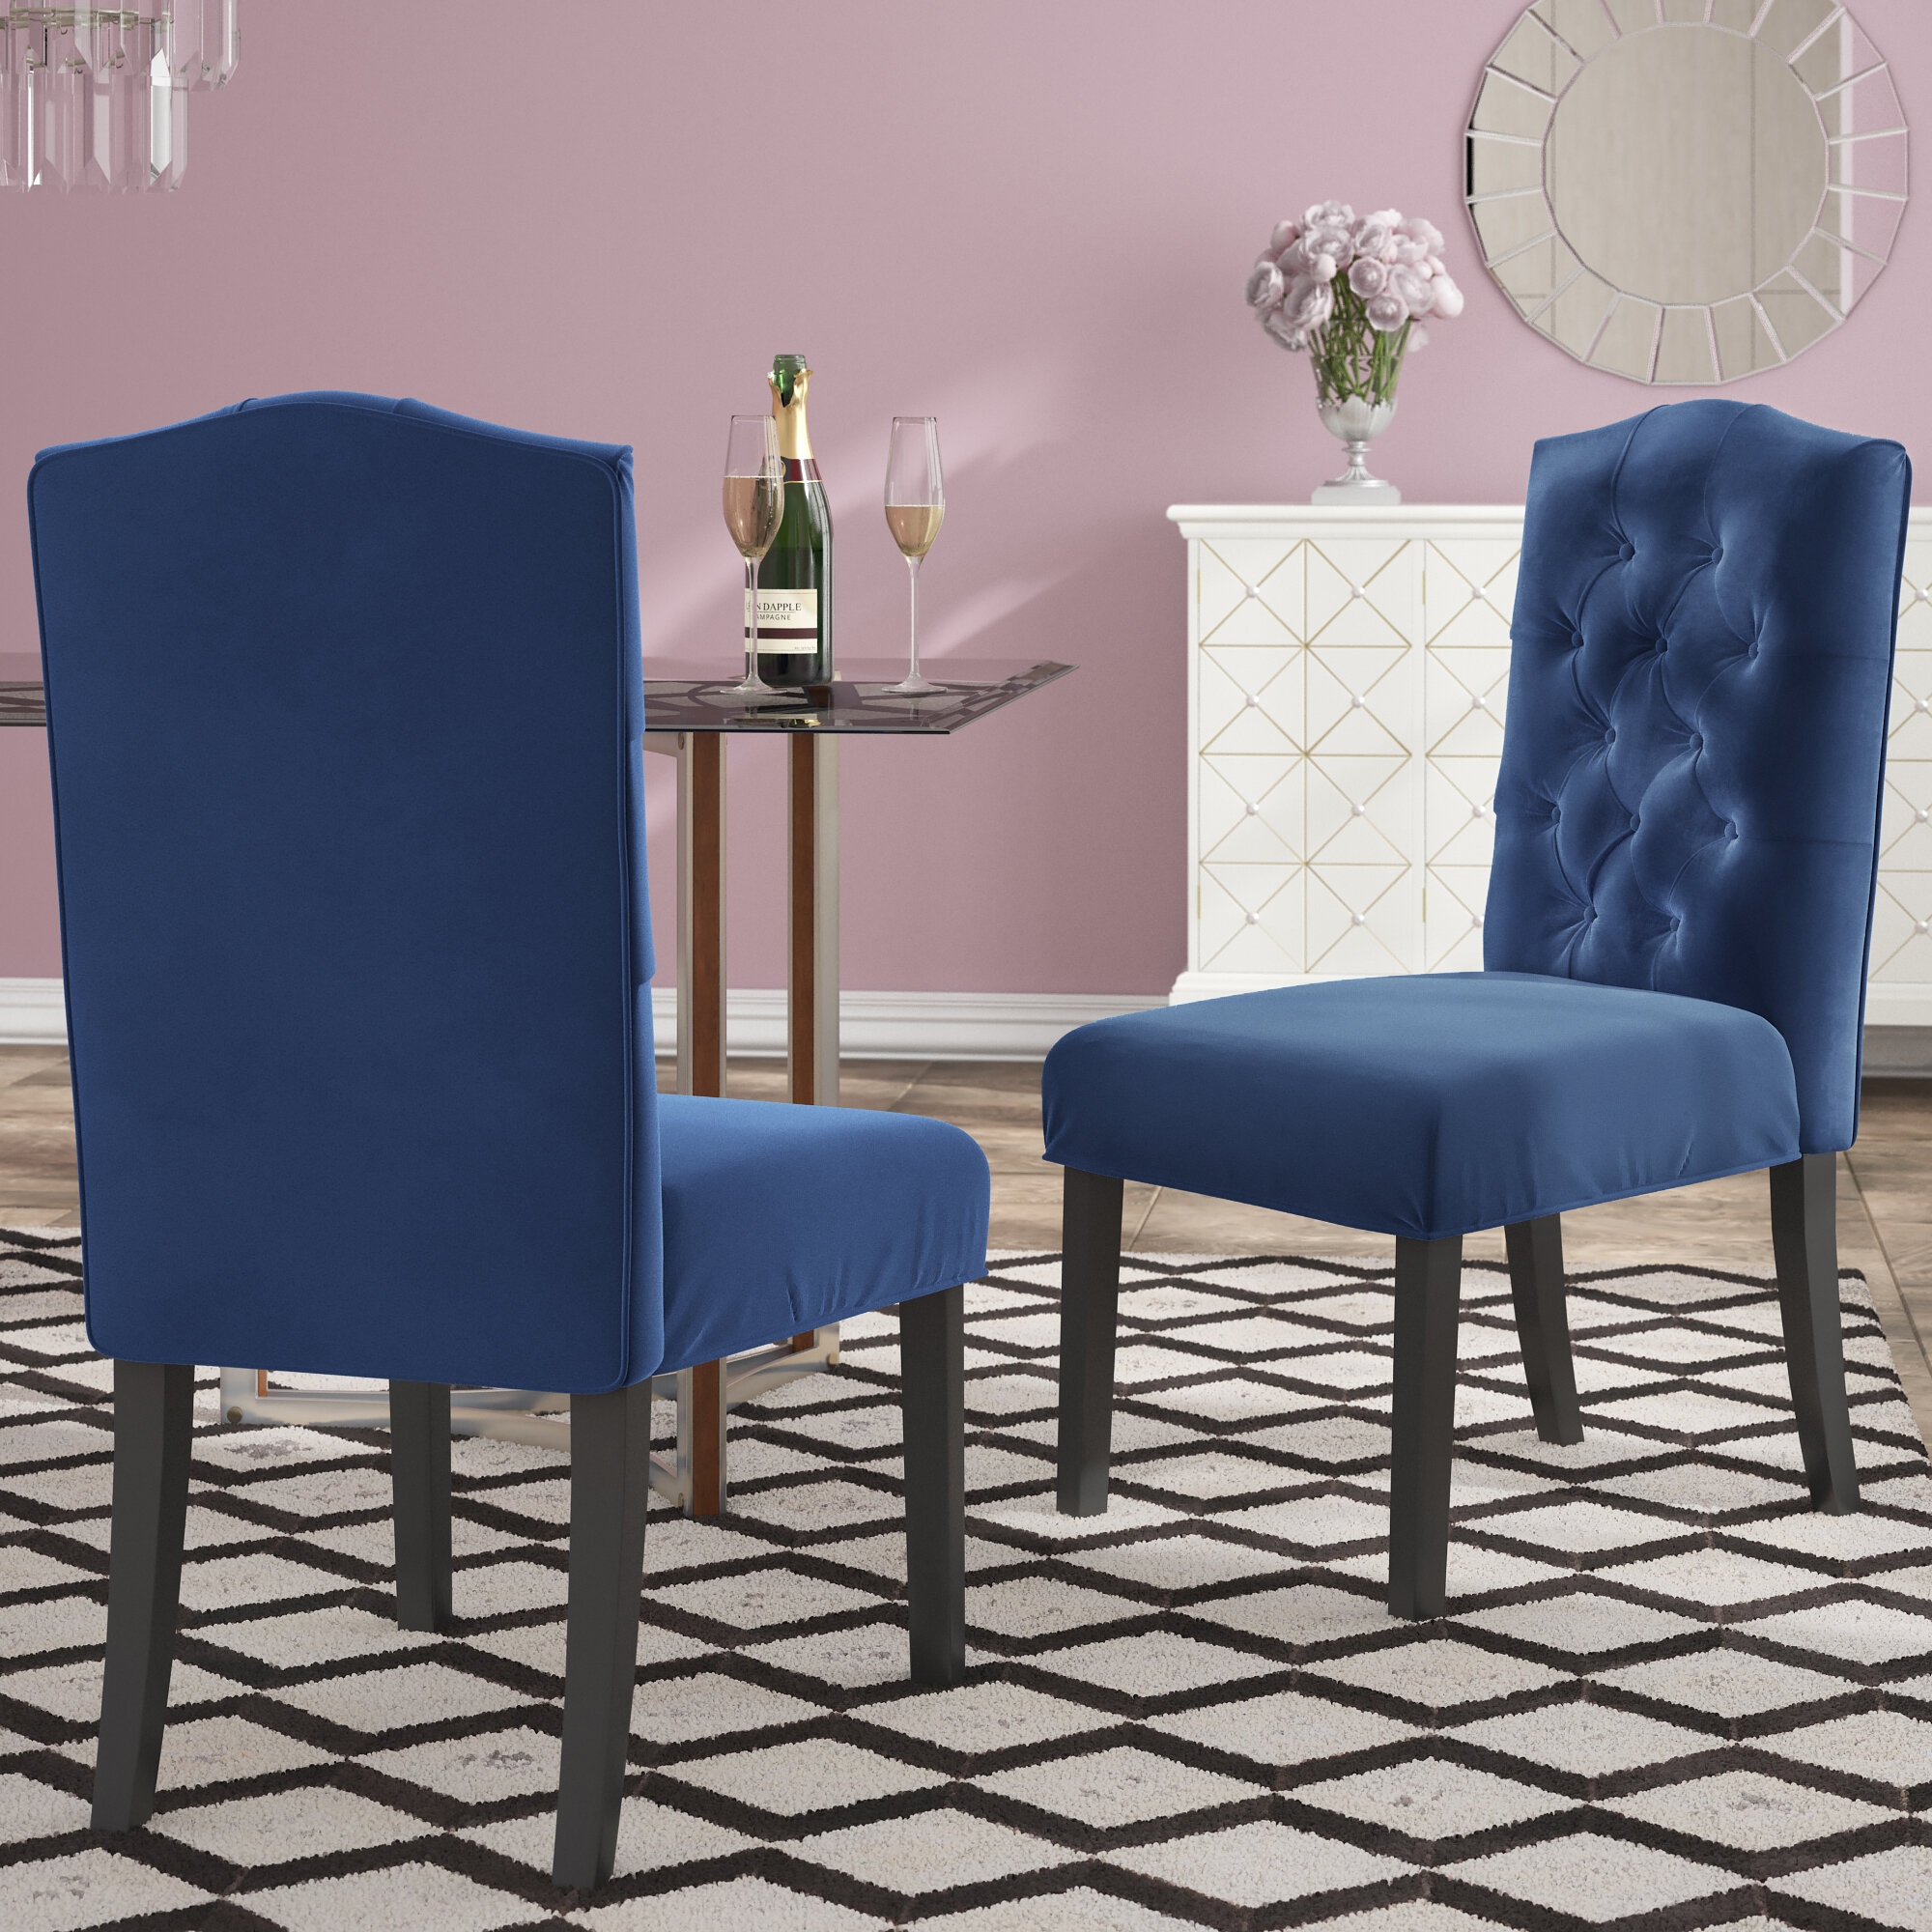 Traditional Upholstered Dining Chairs - Dining room ideas